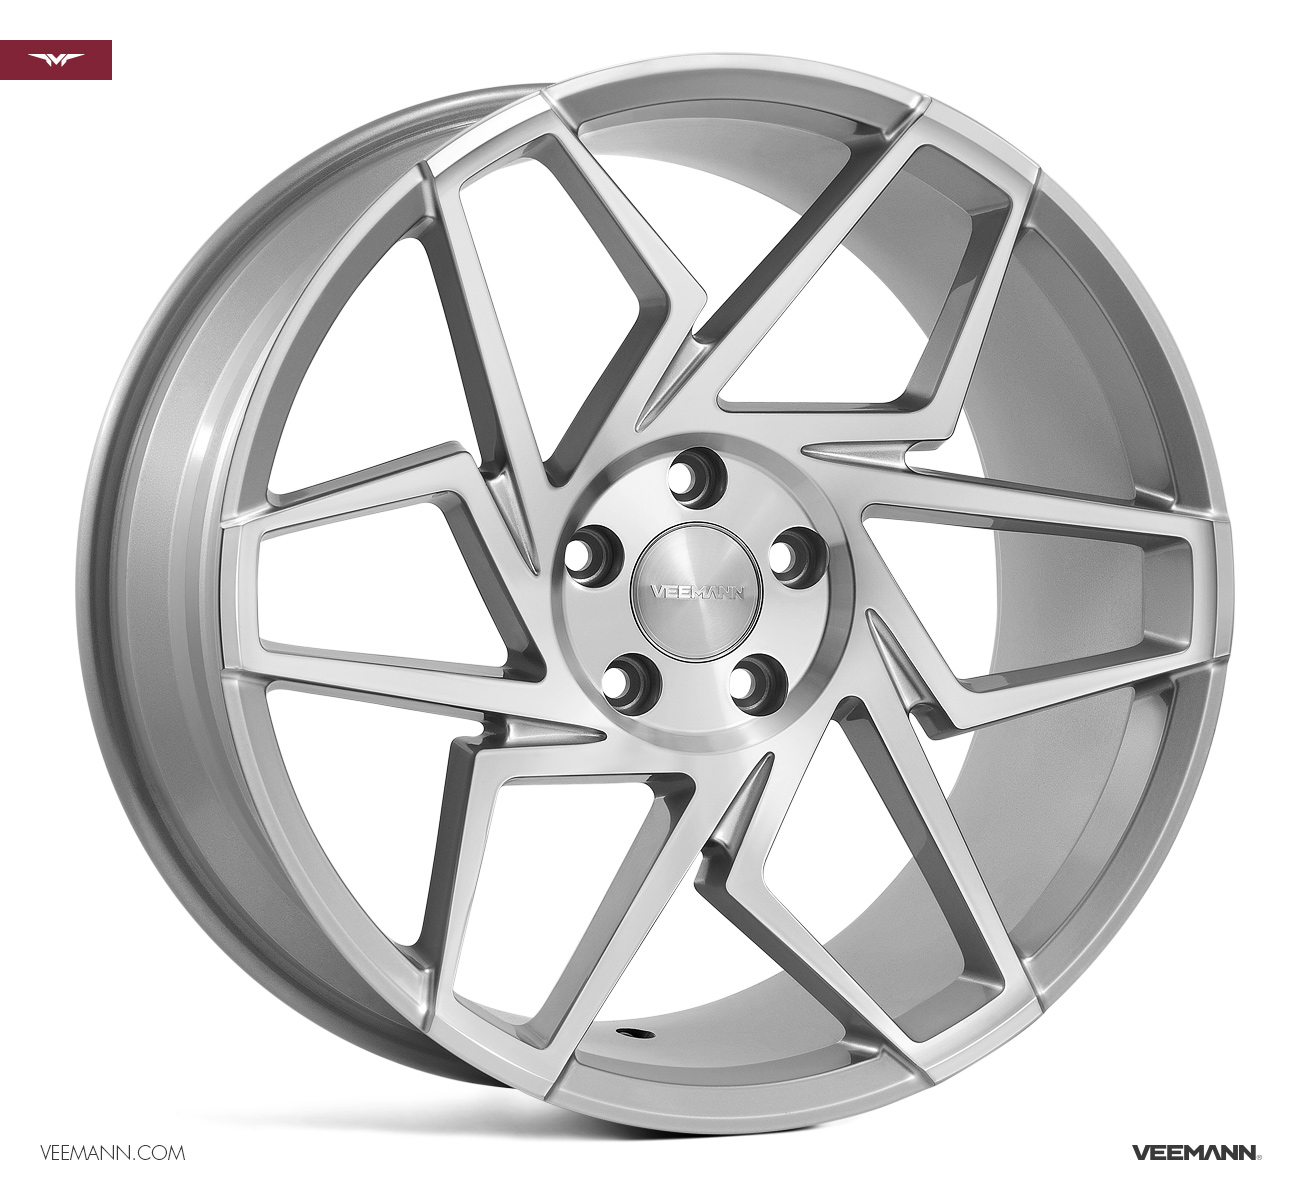 NEW 19" VEEMANN V-FS27R ALLOY WHEELS IN SILVER POL WITH WIDER 9.5" REARS et42/40-42